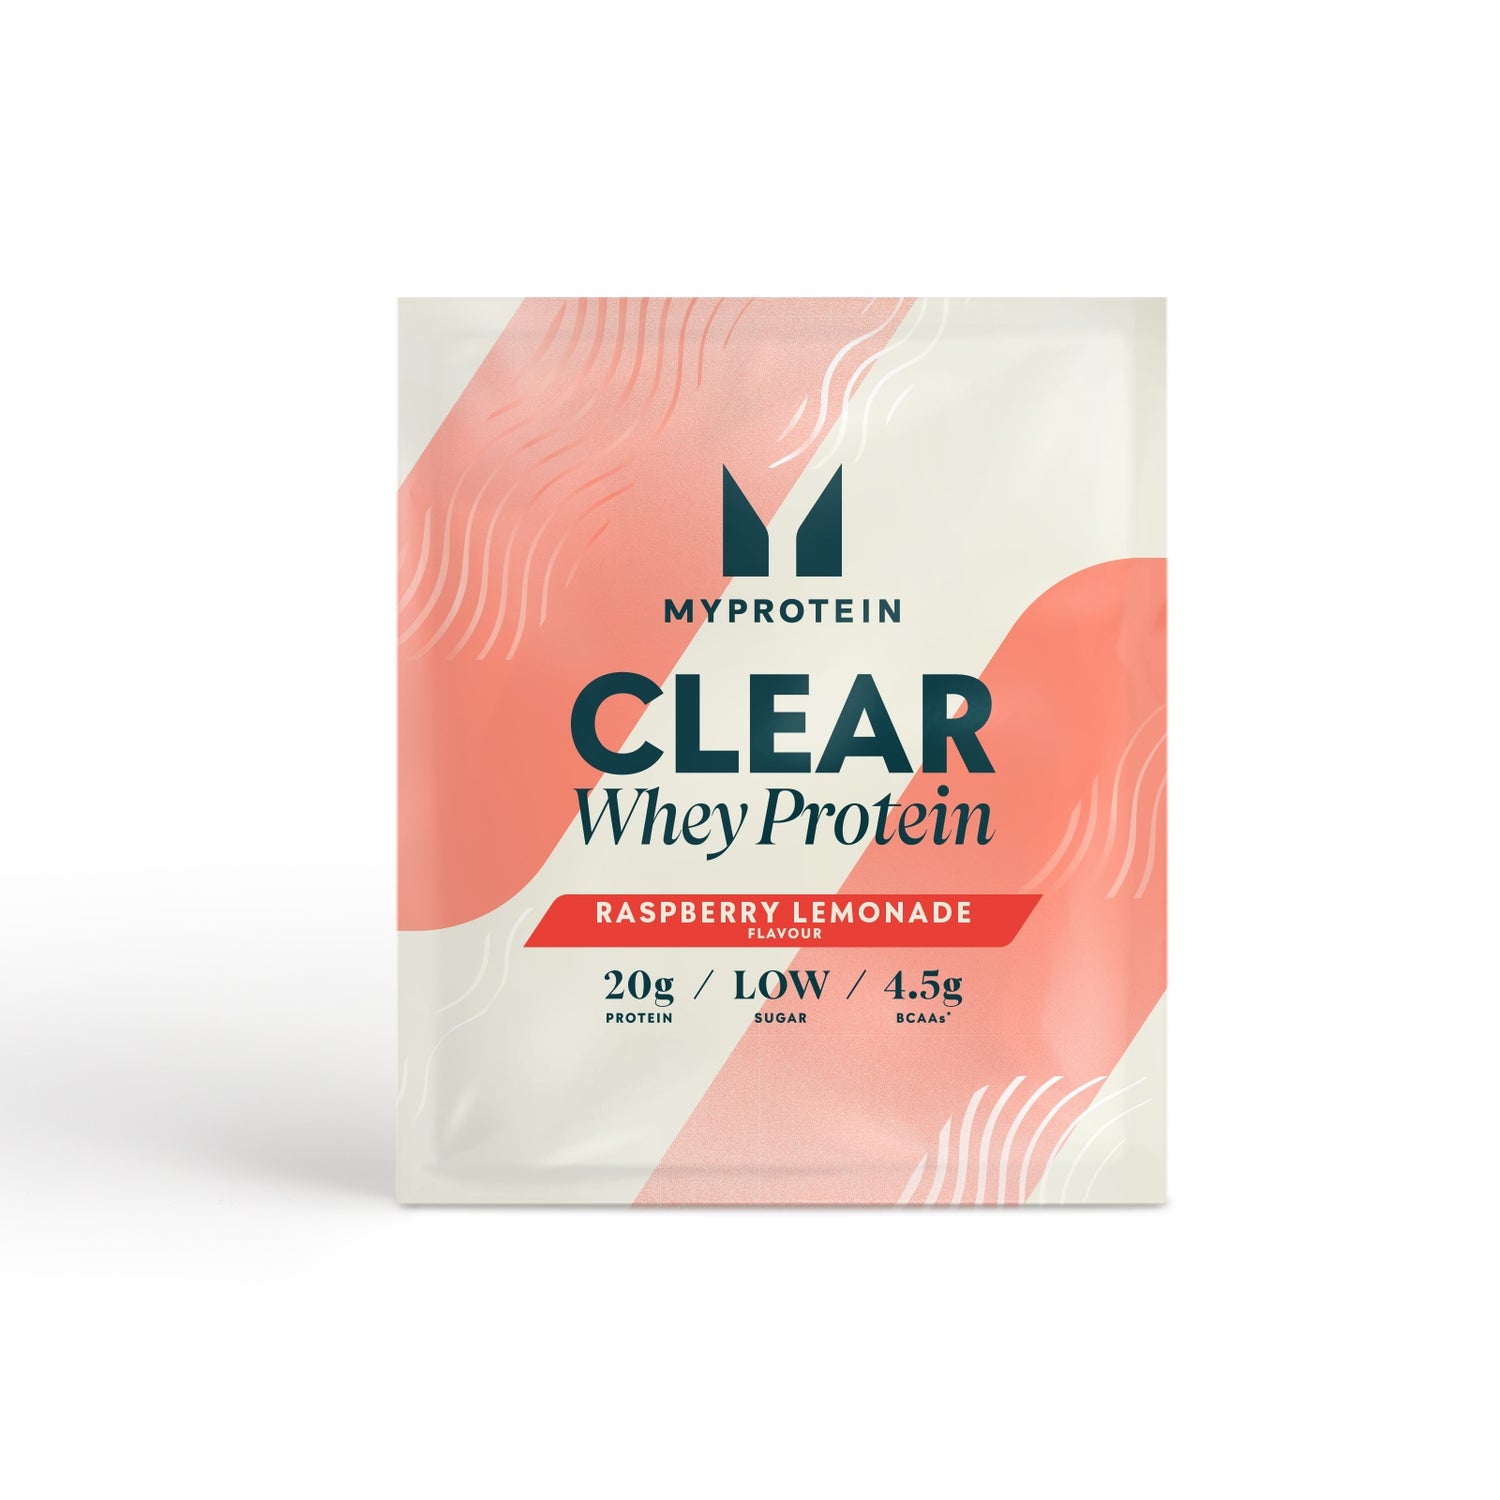 Myprotein Clear Whey Isolate (Sample) - 1servings - Himbeerlimonade